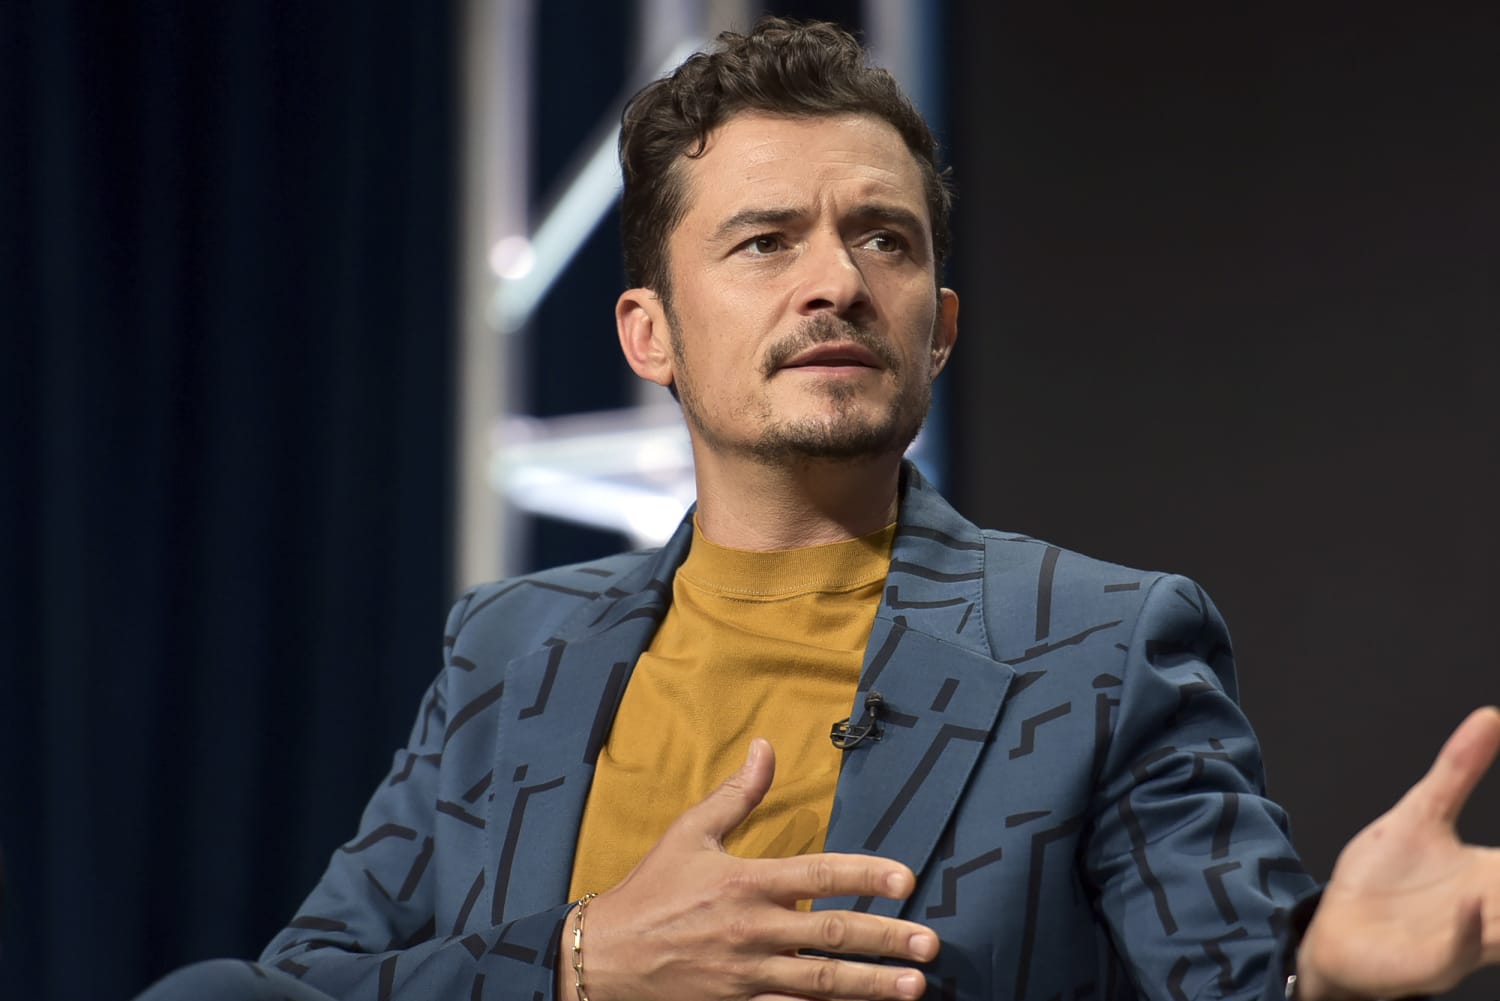 The rise and fall of Orlando Bloom: The actor destined to reign in  Hollywood who got sick of seeing himself on screen, Culture